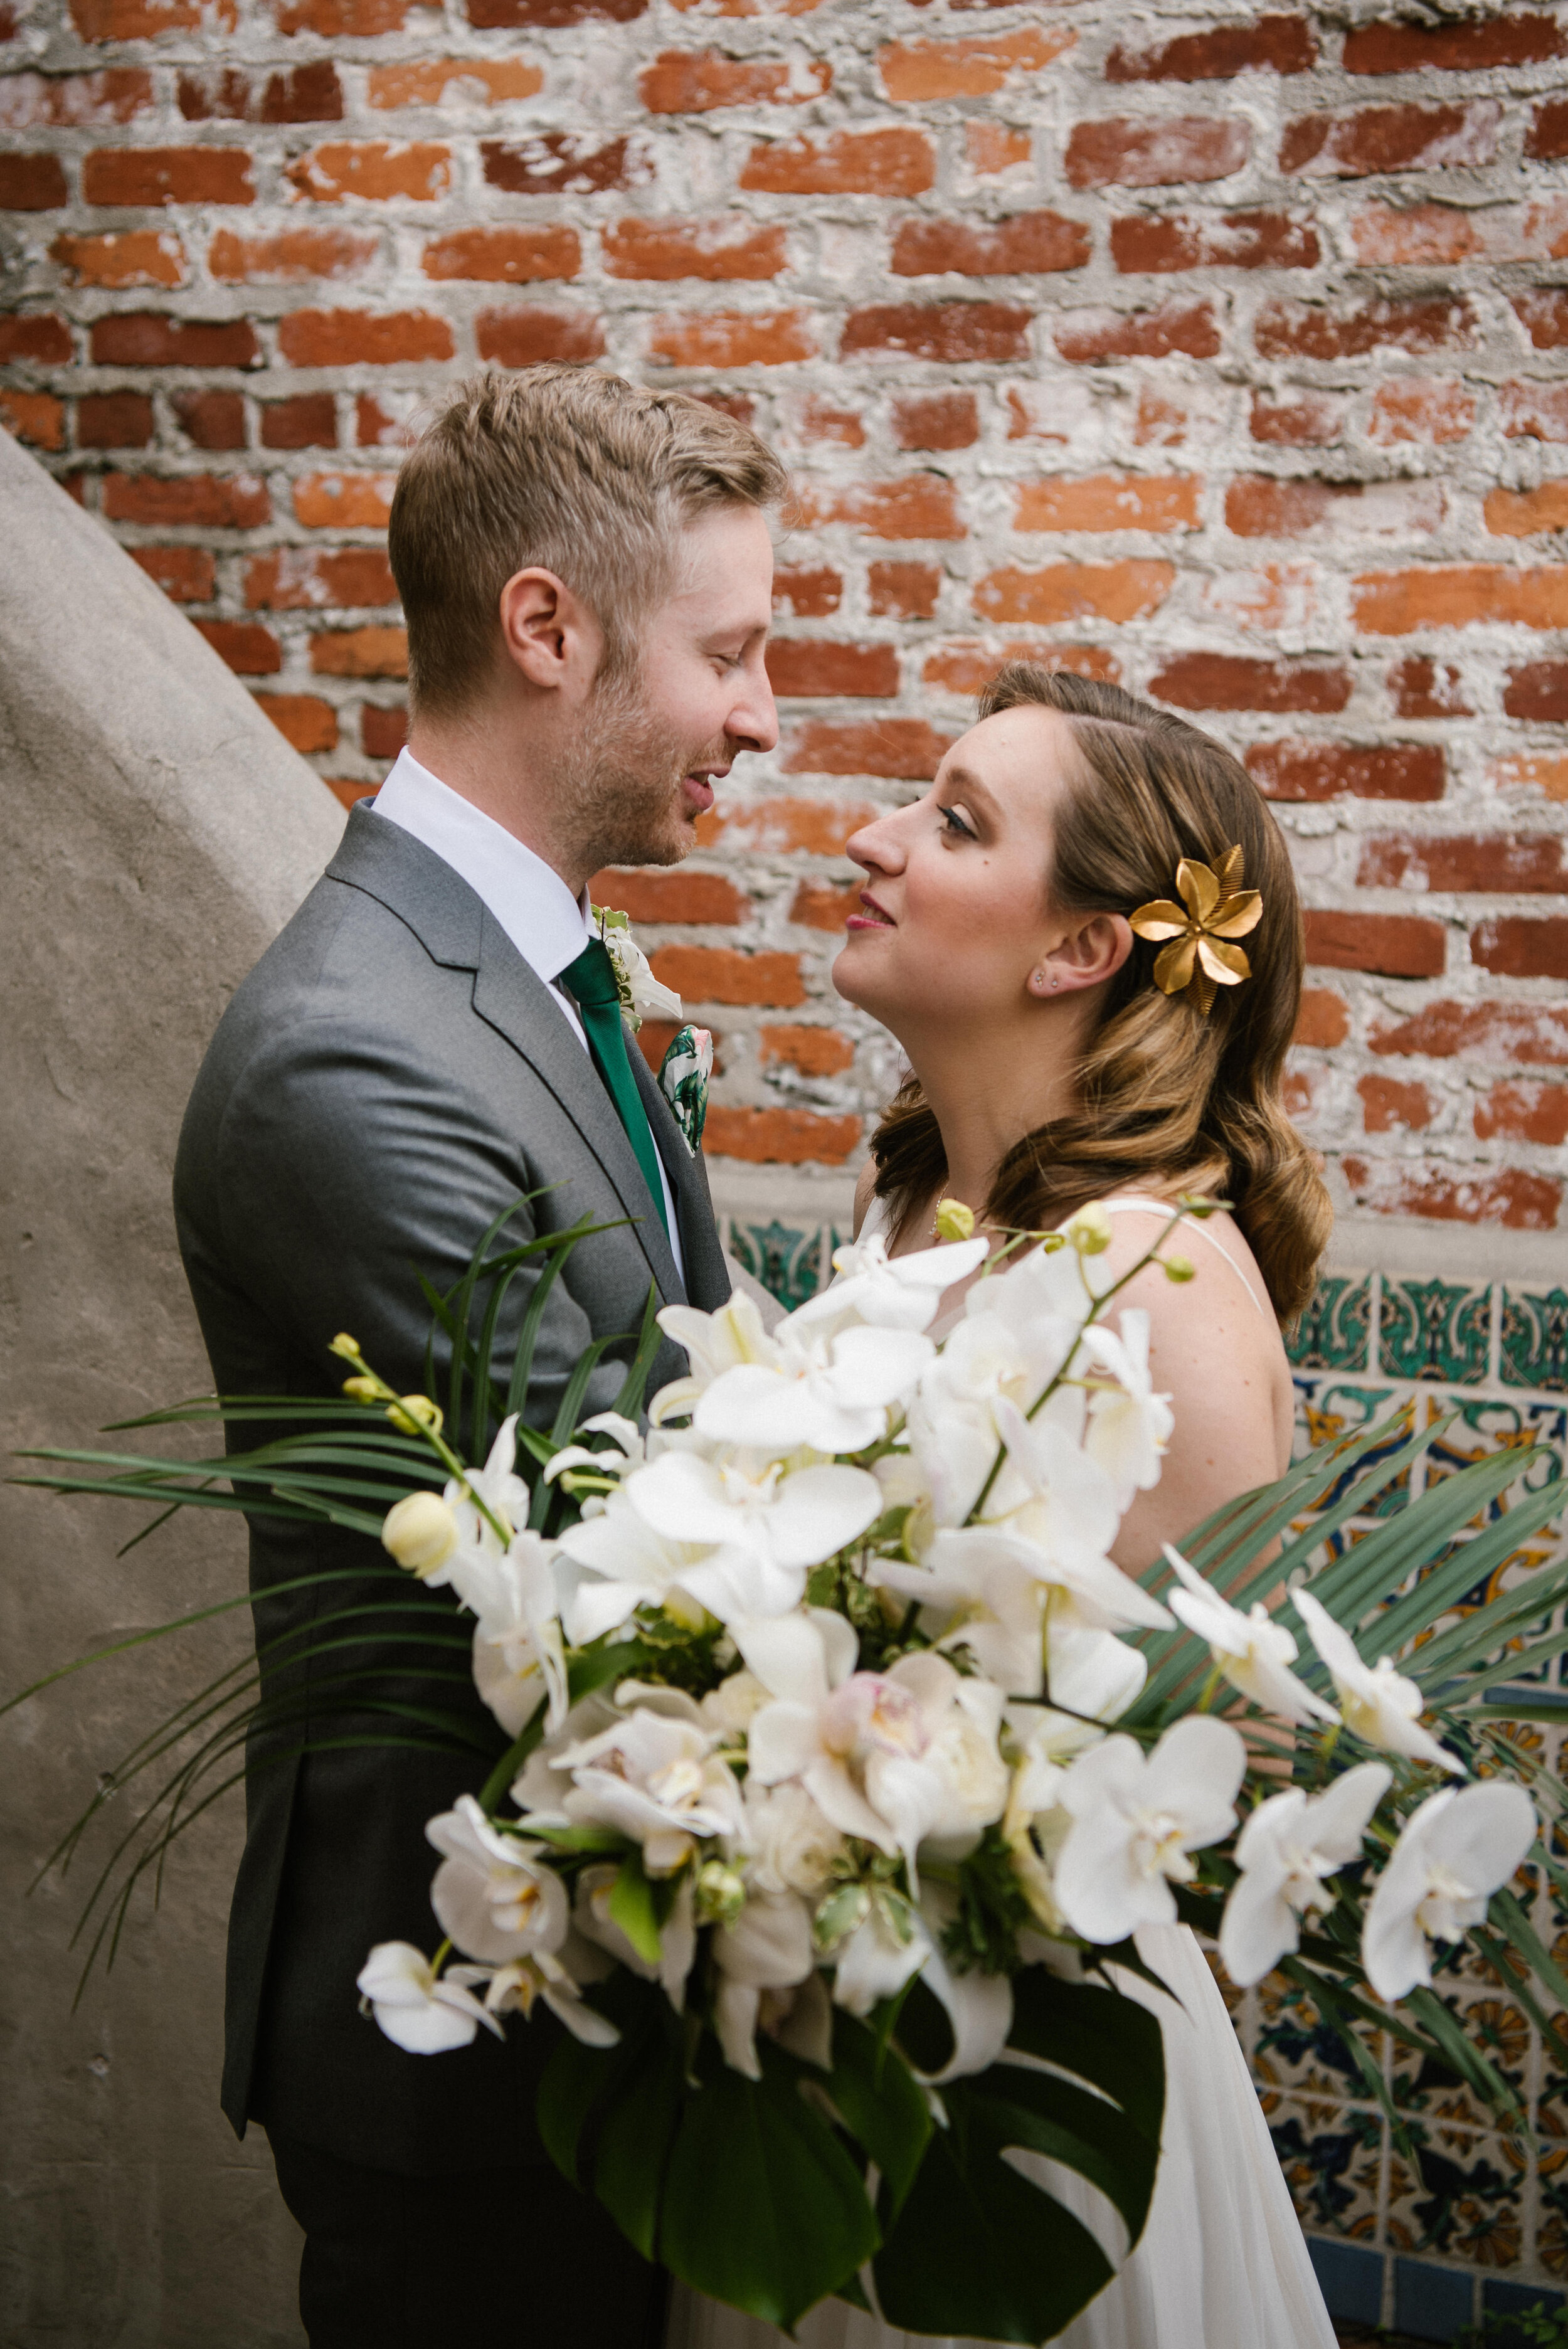 Bluegrass Chic - Casa Feliz Fox and Film Photography Bridal Bouquet Orchids and Tropical Palms